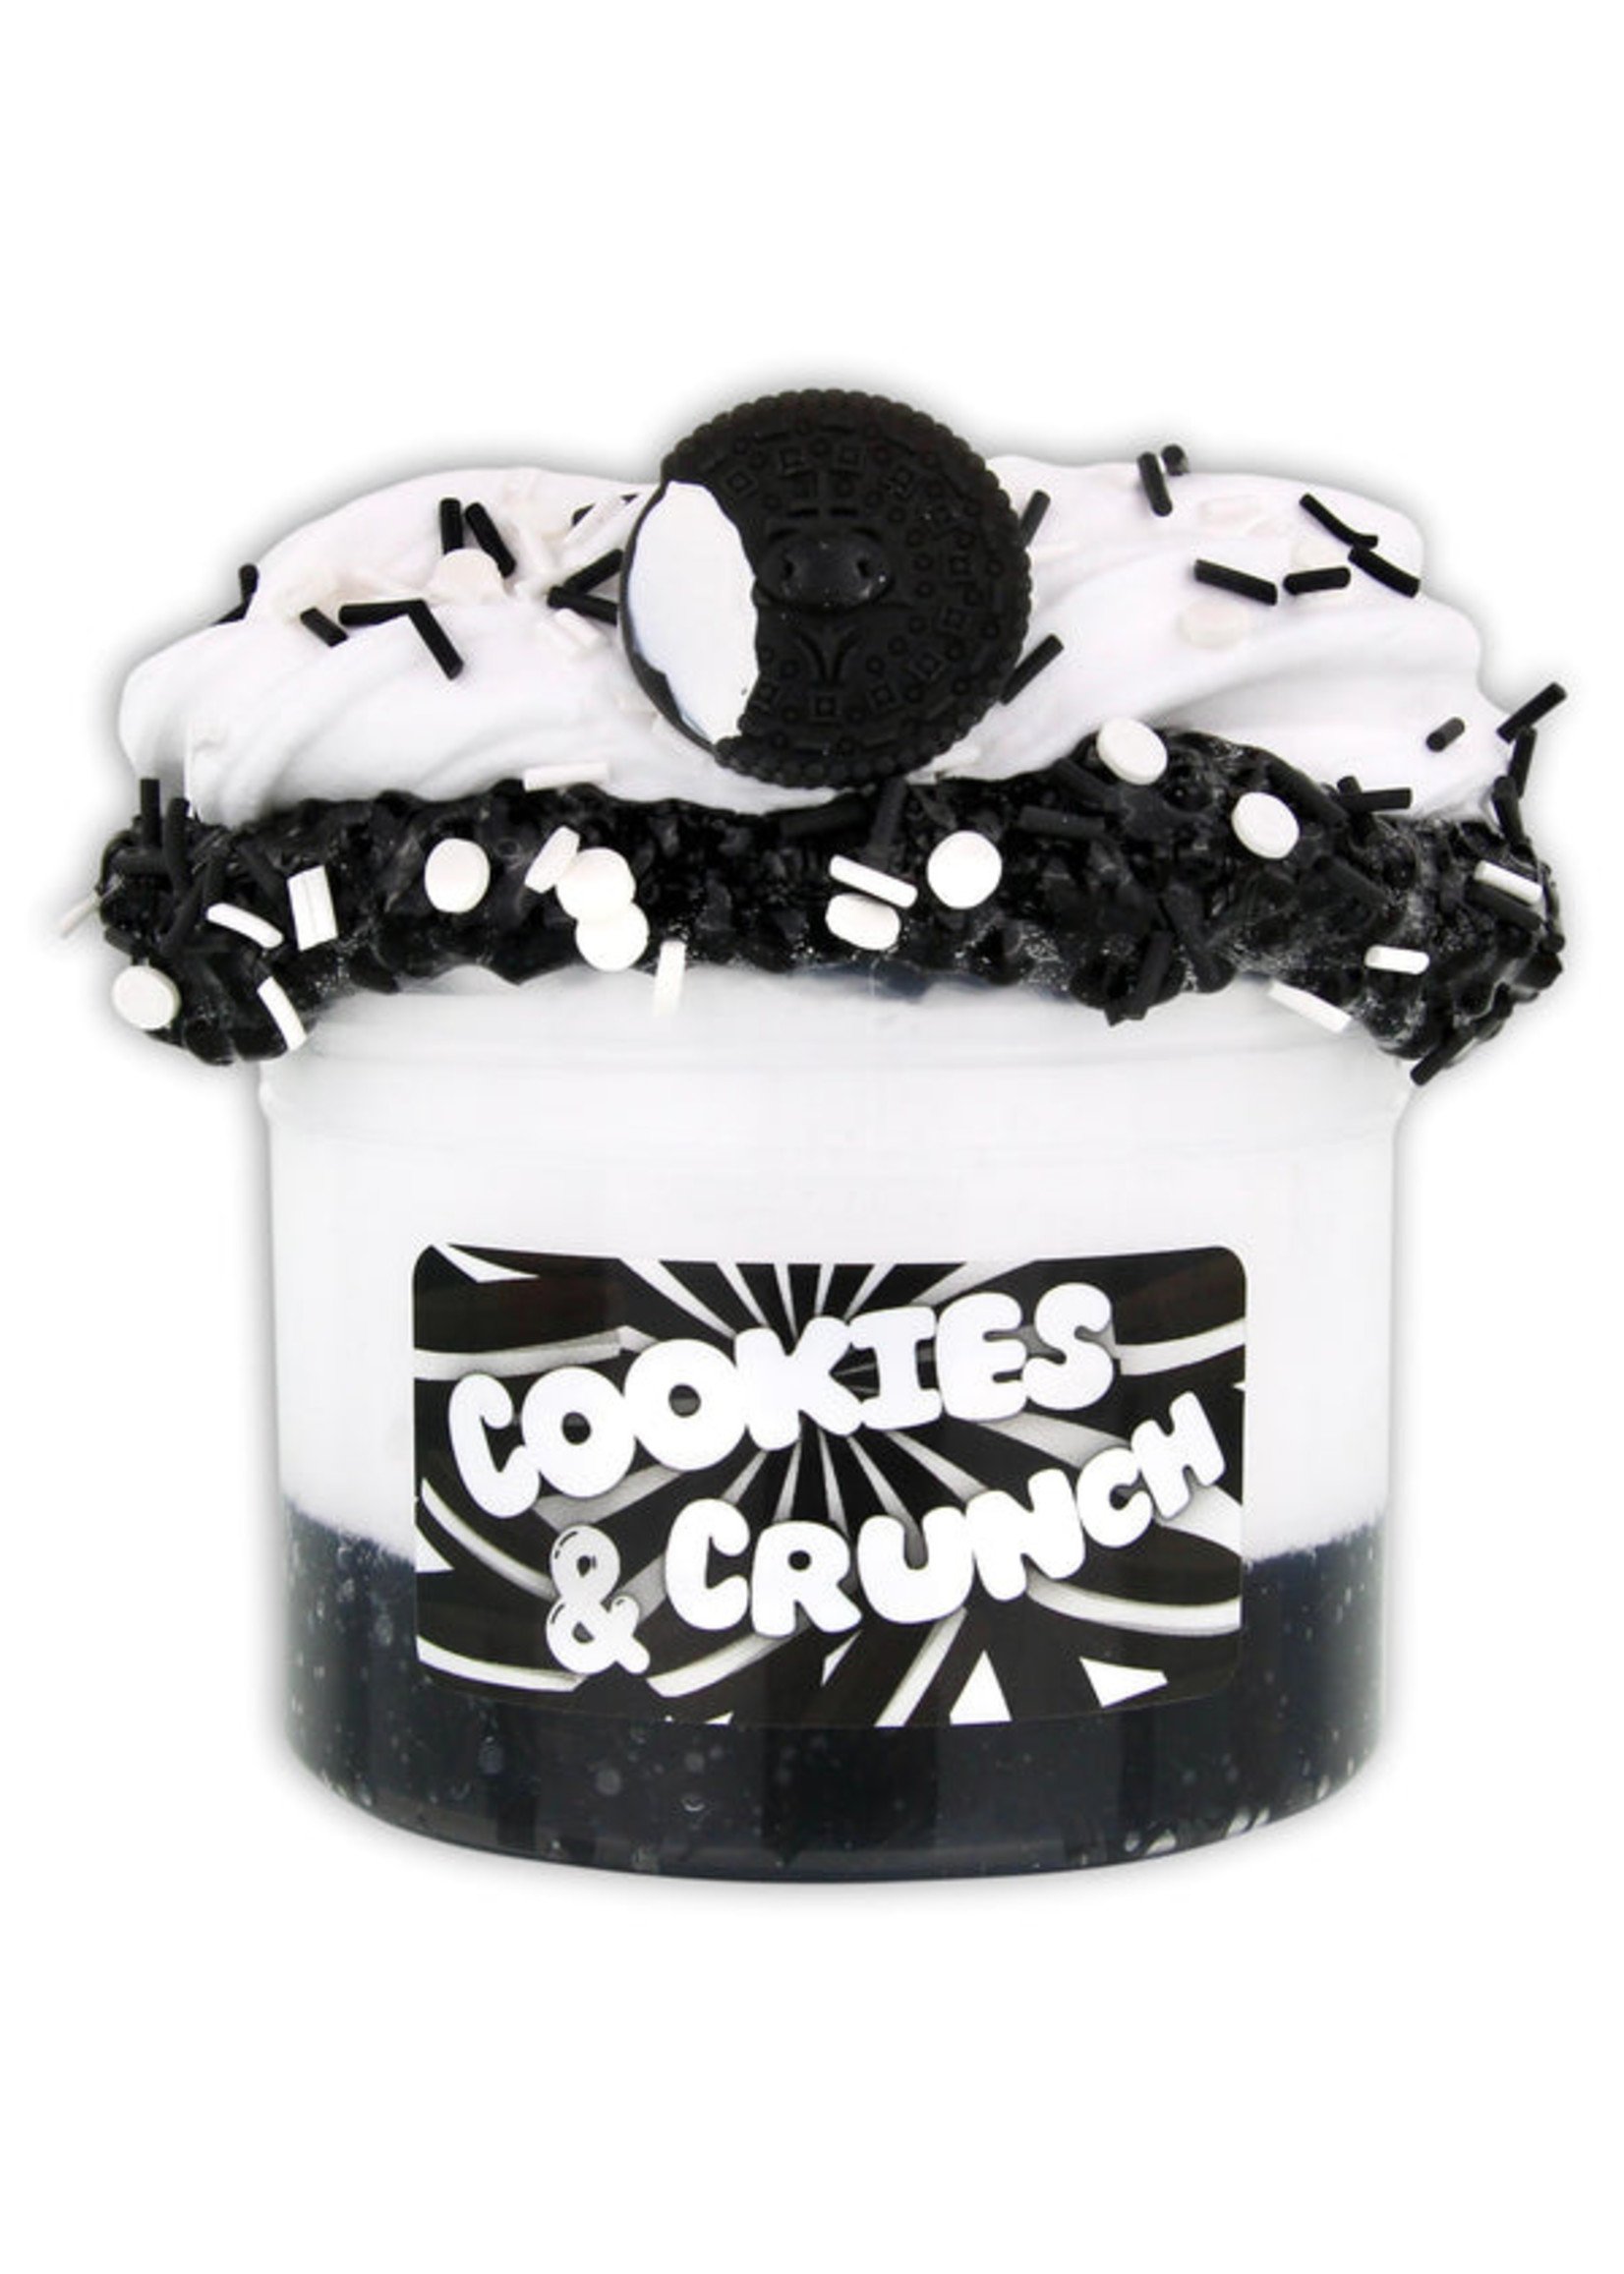 Dope Slimes Cookies & Crunch Butter Slime - 8oz